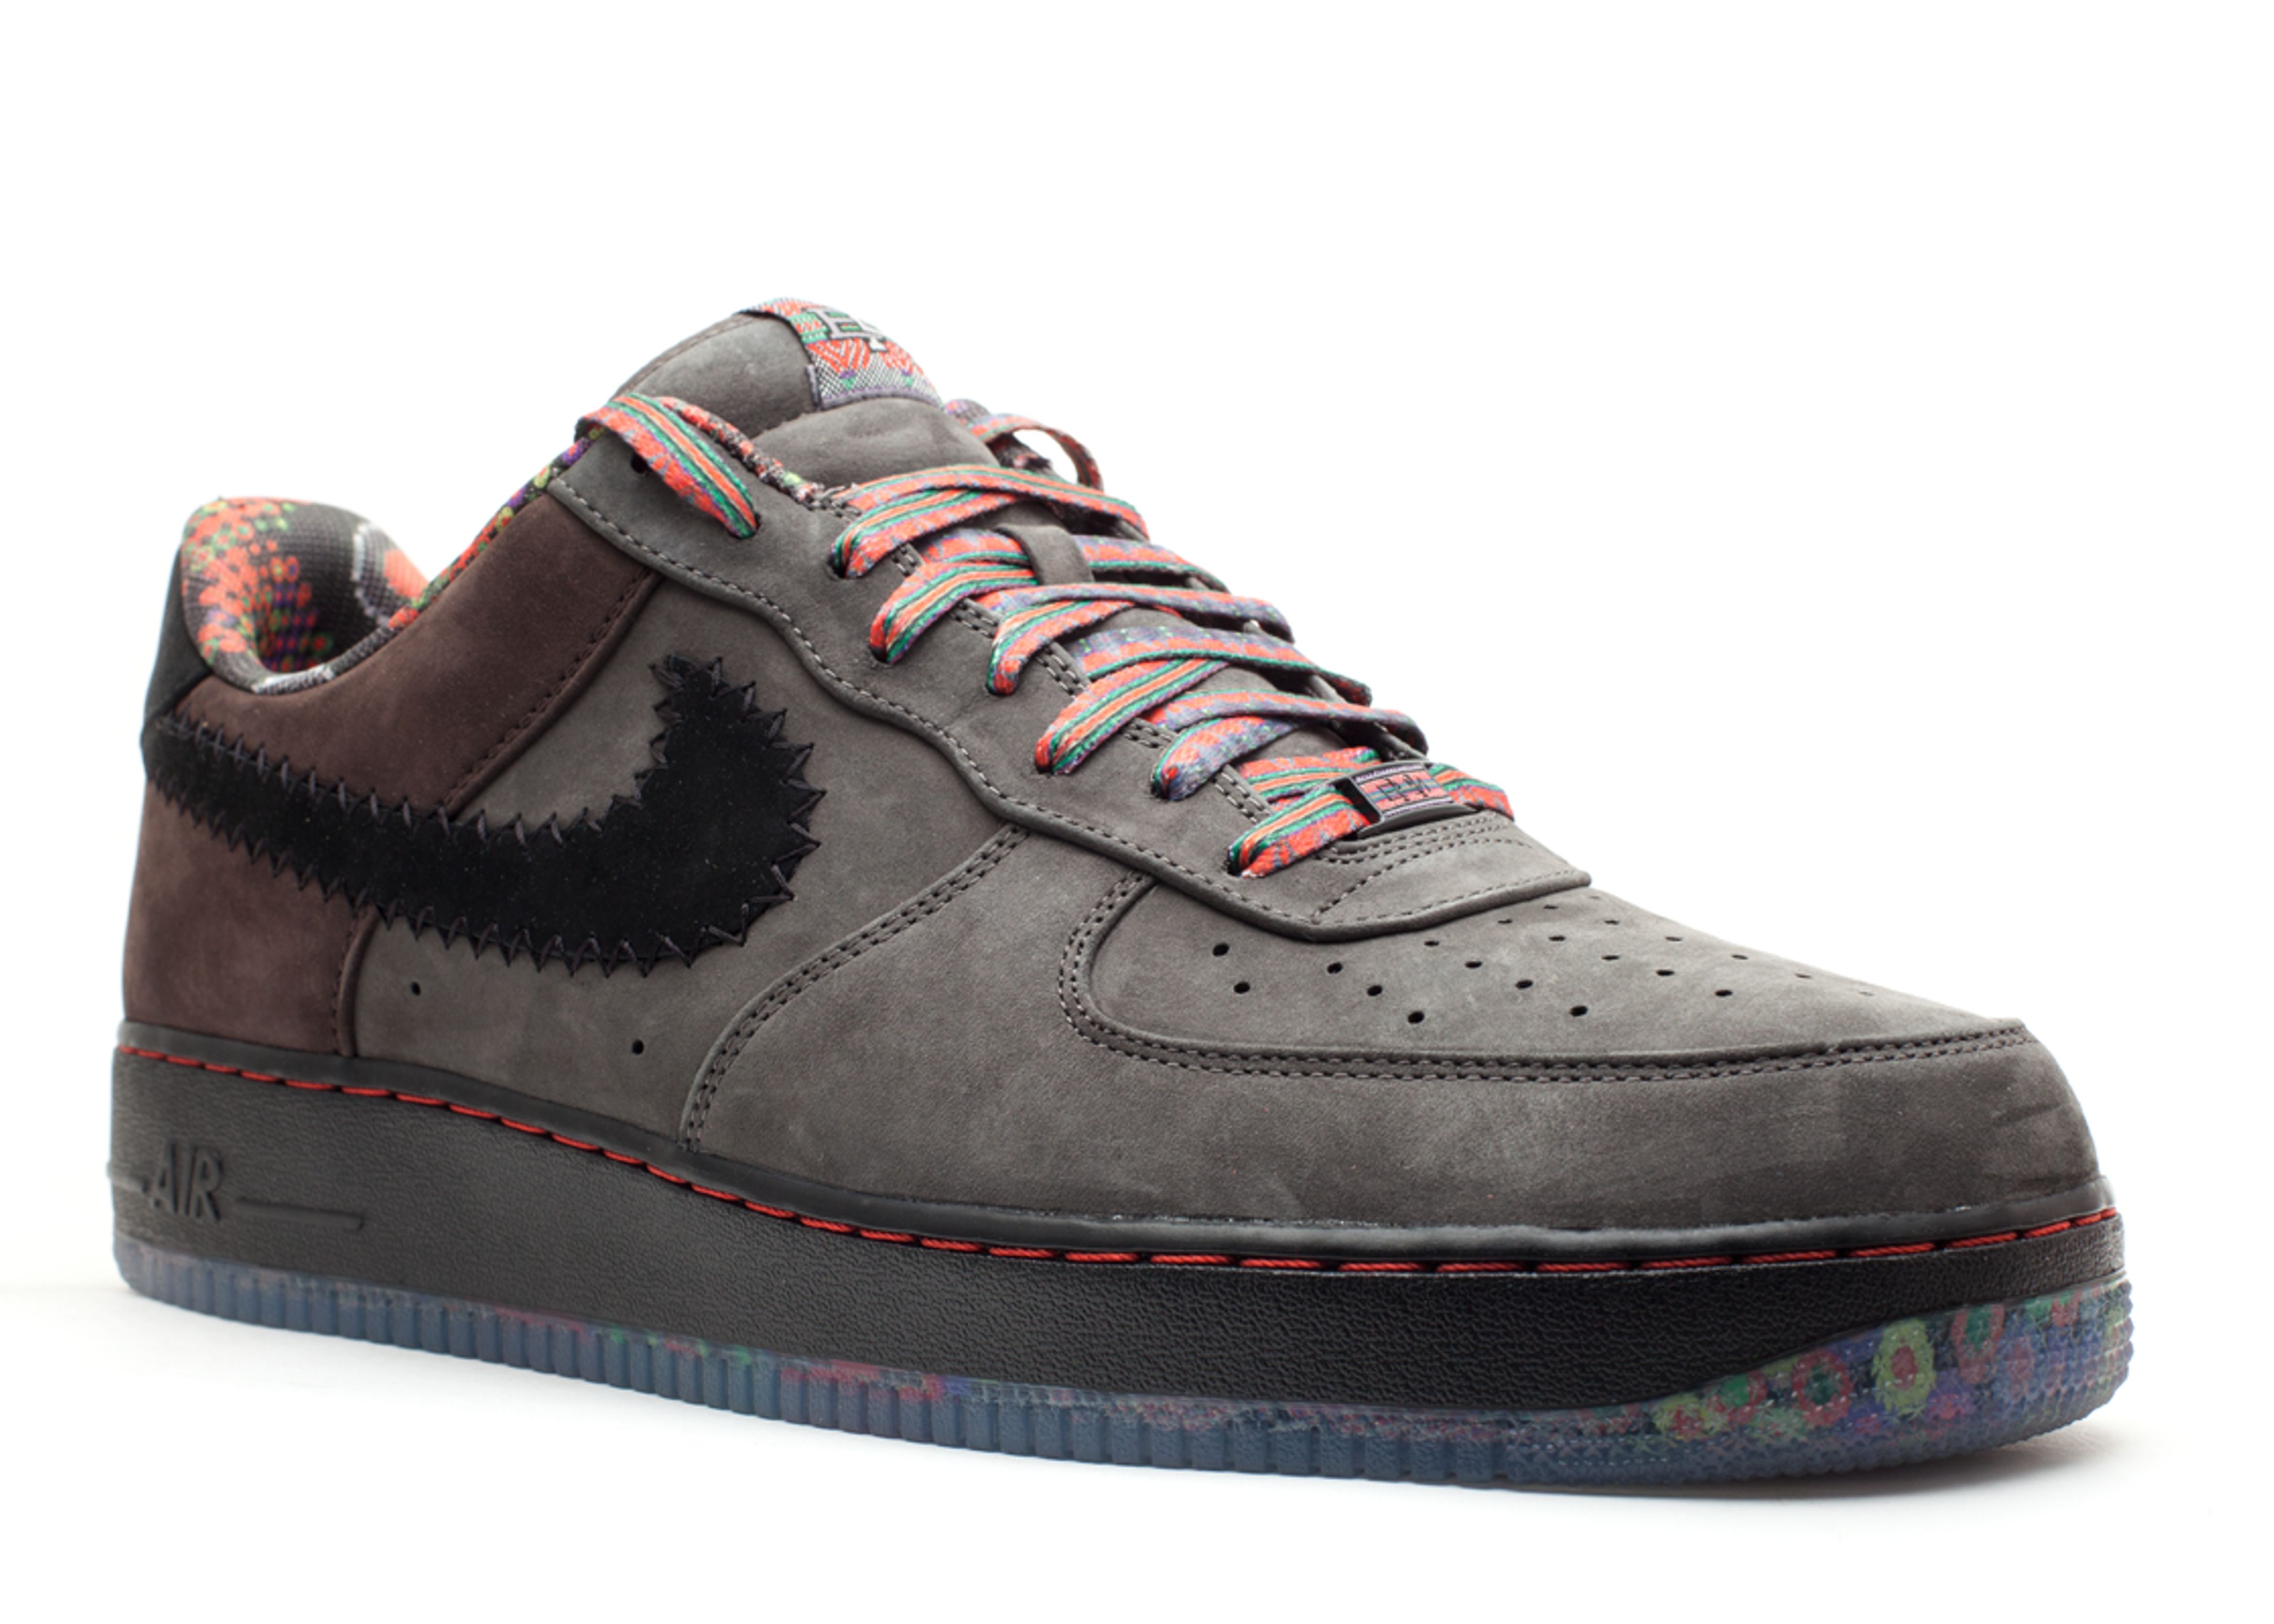 Air Force 1 Low Prm Bhm 'Black History Month 2012' - Nike - 453419 